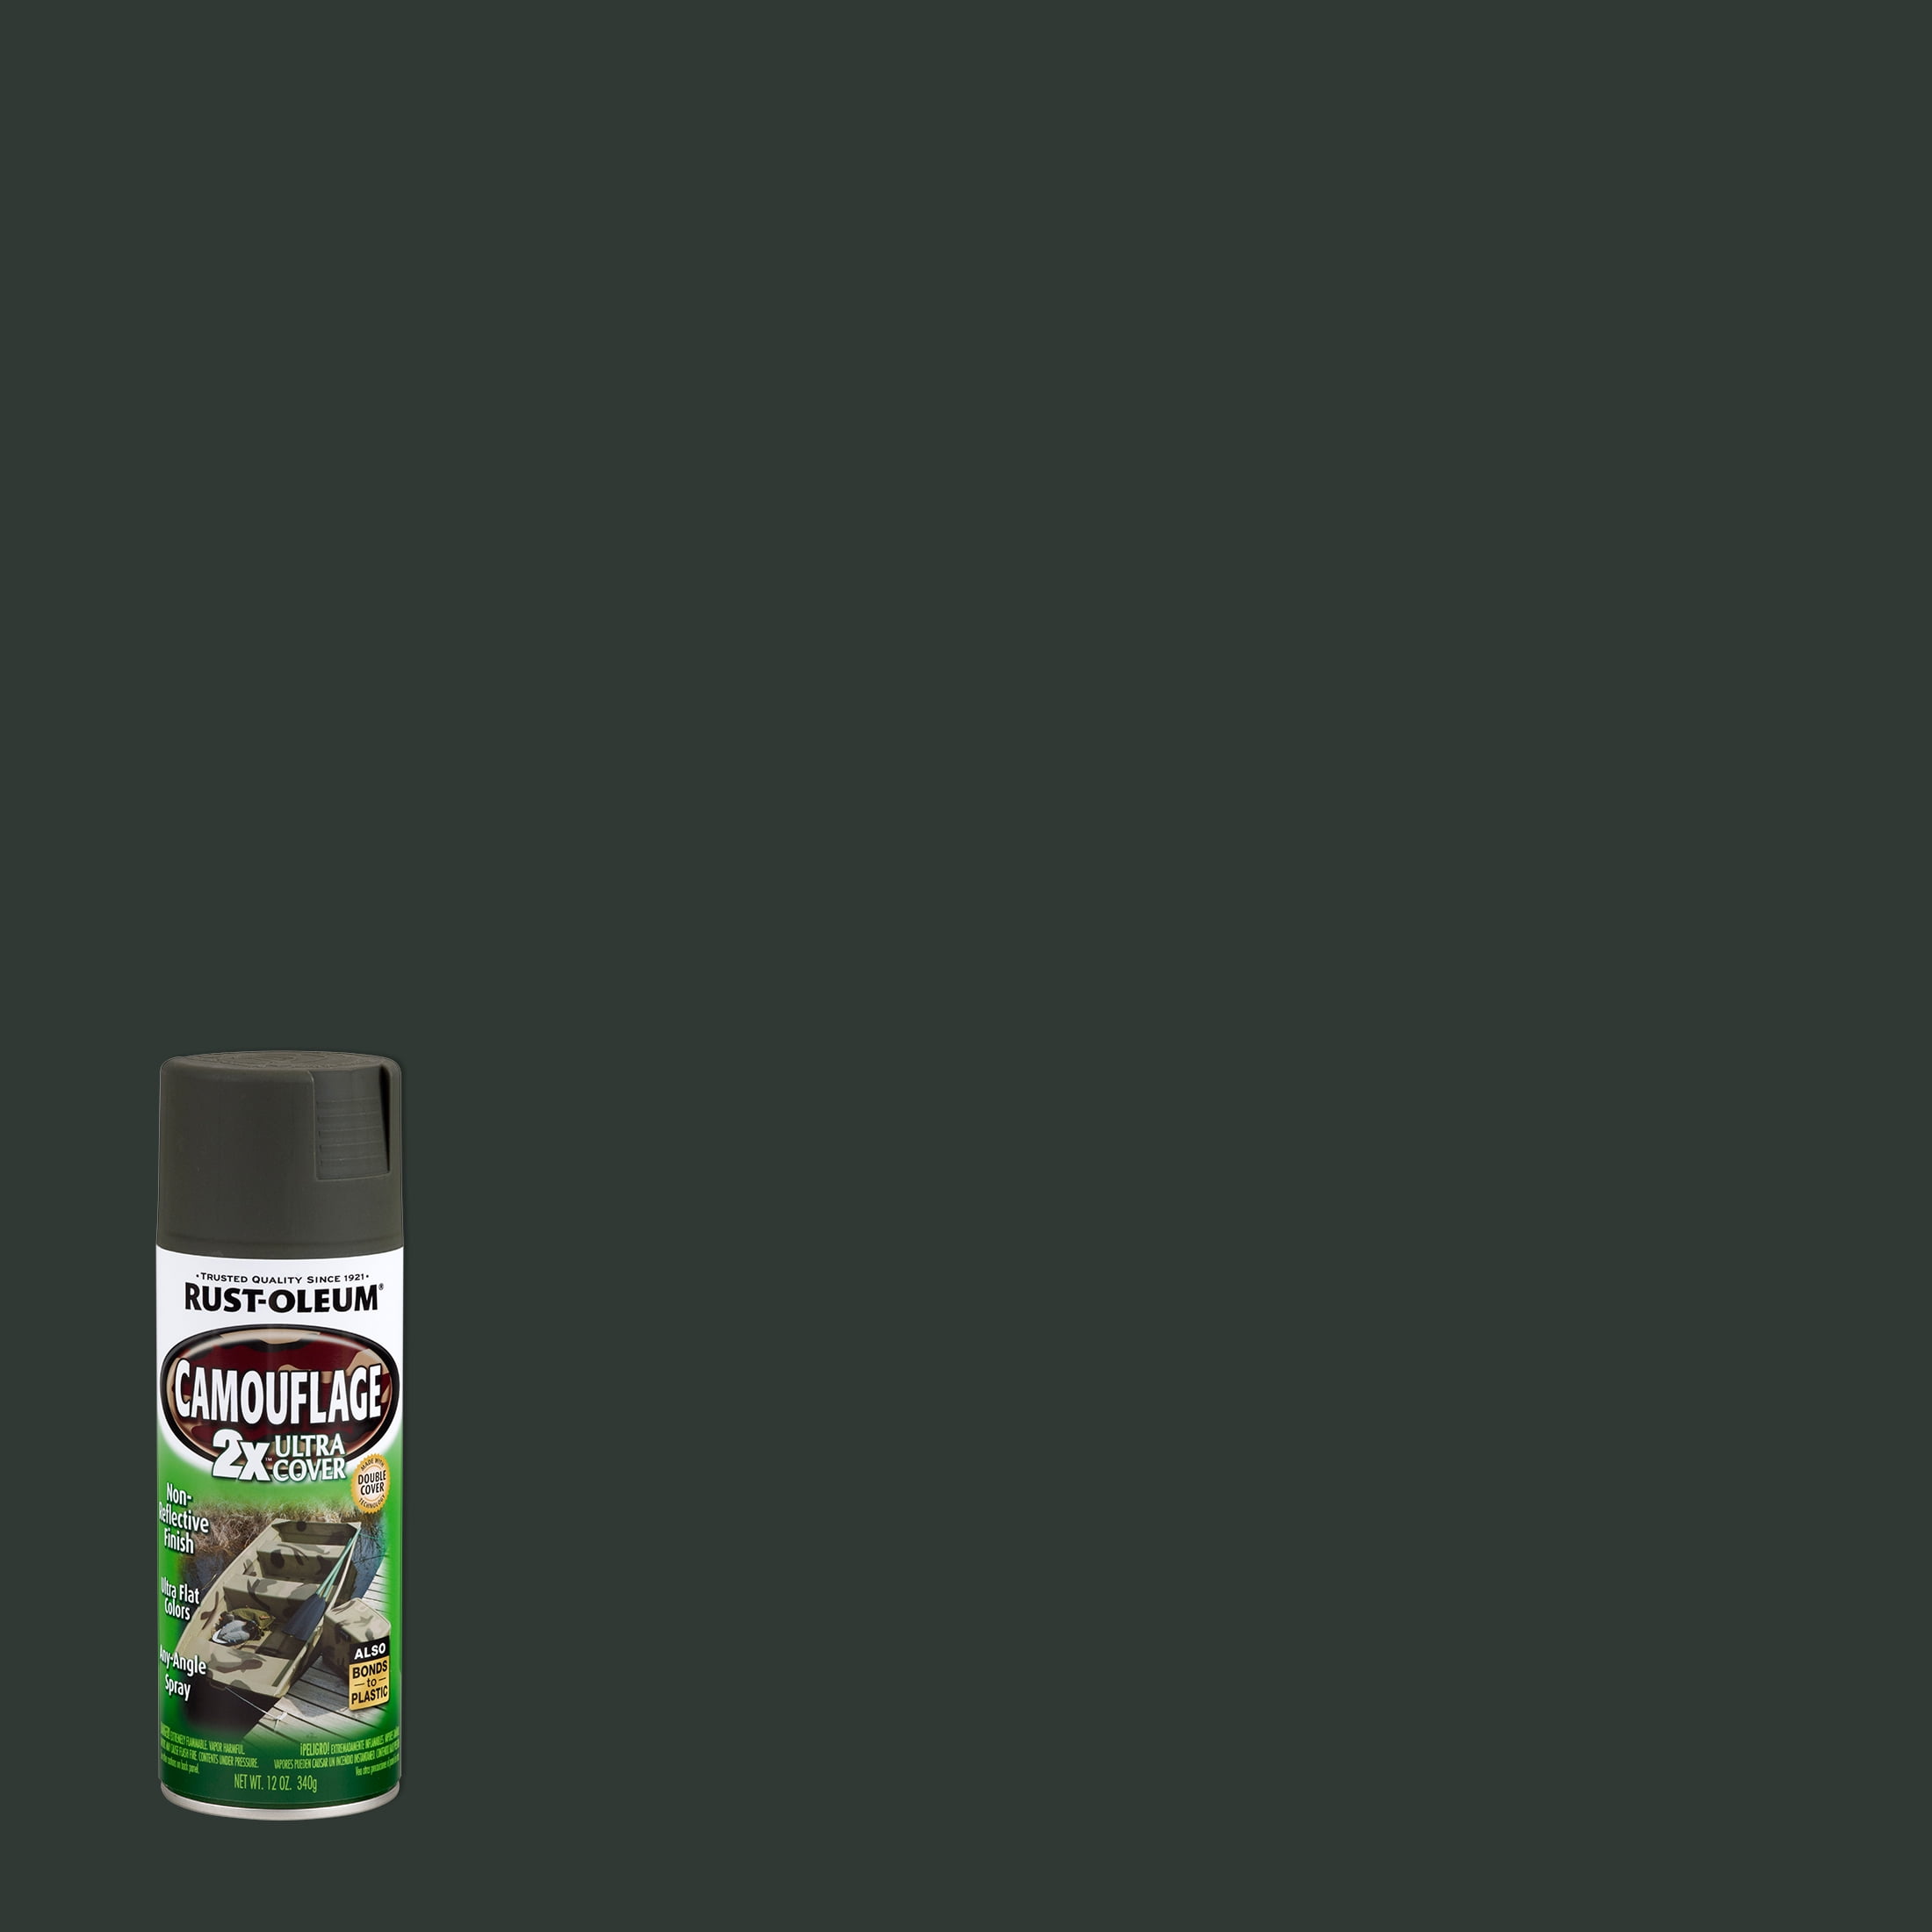 Deep Forest Green, Rust-Oleum Camouflage 2X Ultra Cover Spray Paint, 12 oz